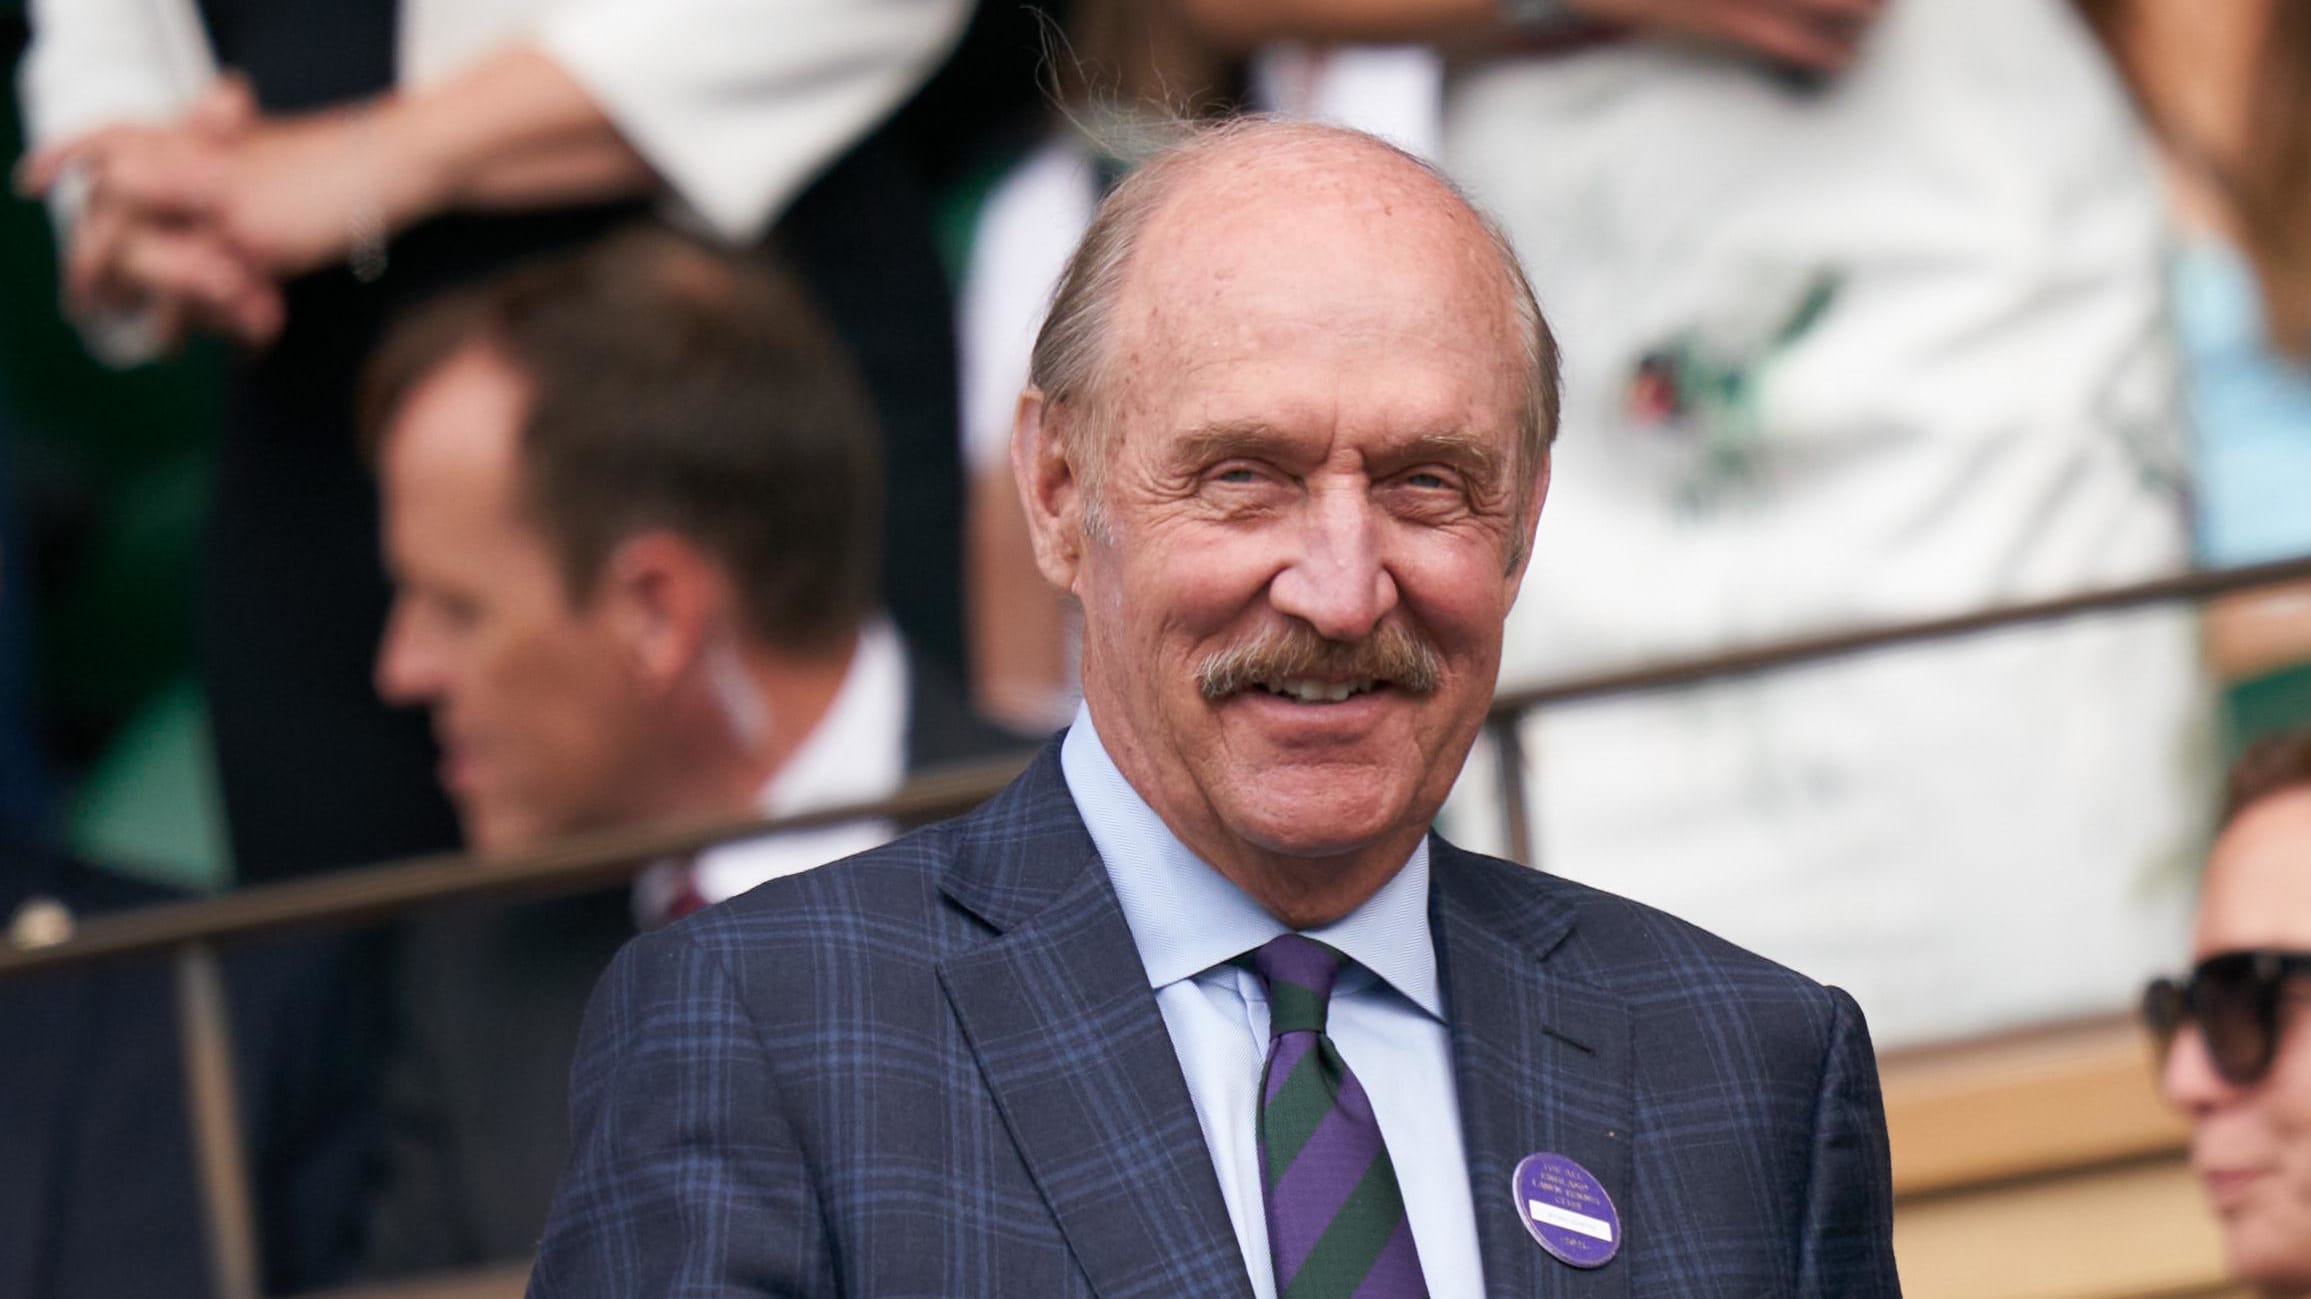 Stan Smith stands in the Royal box at Wimbledon.